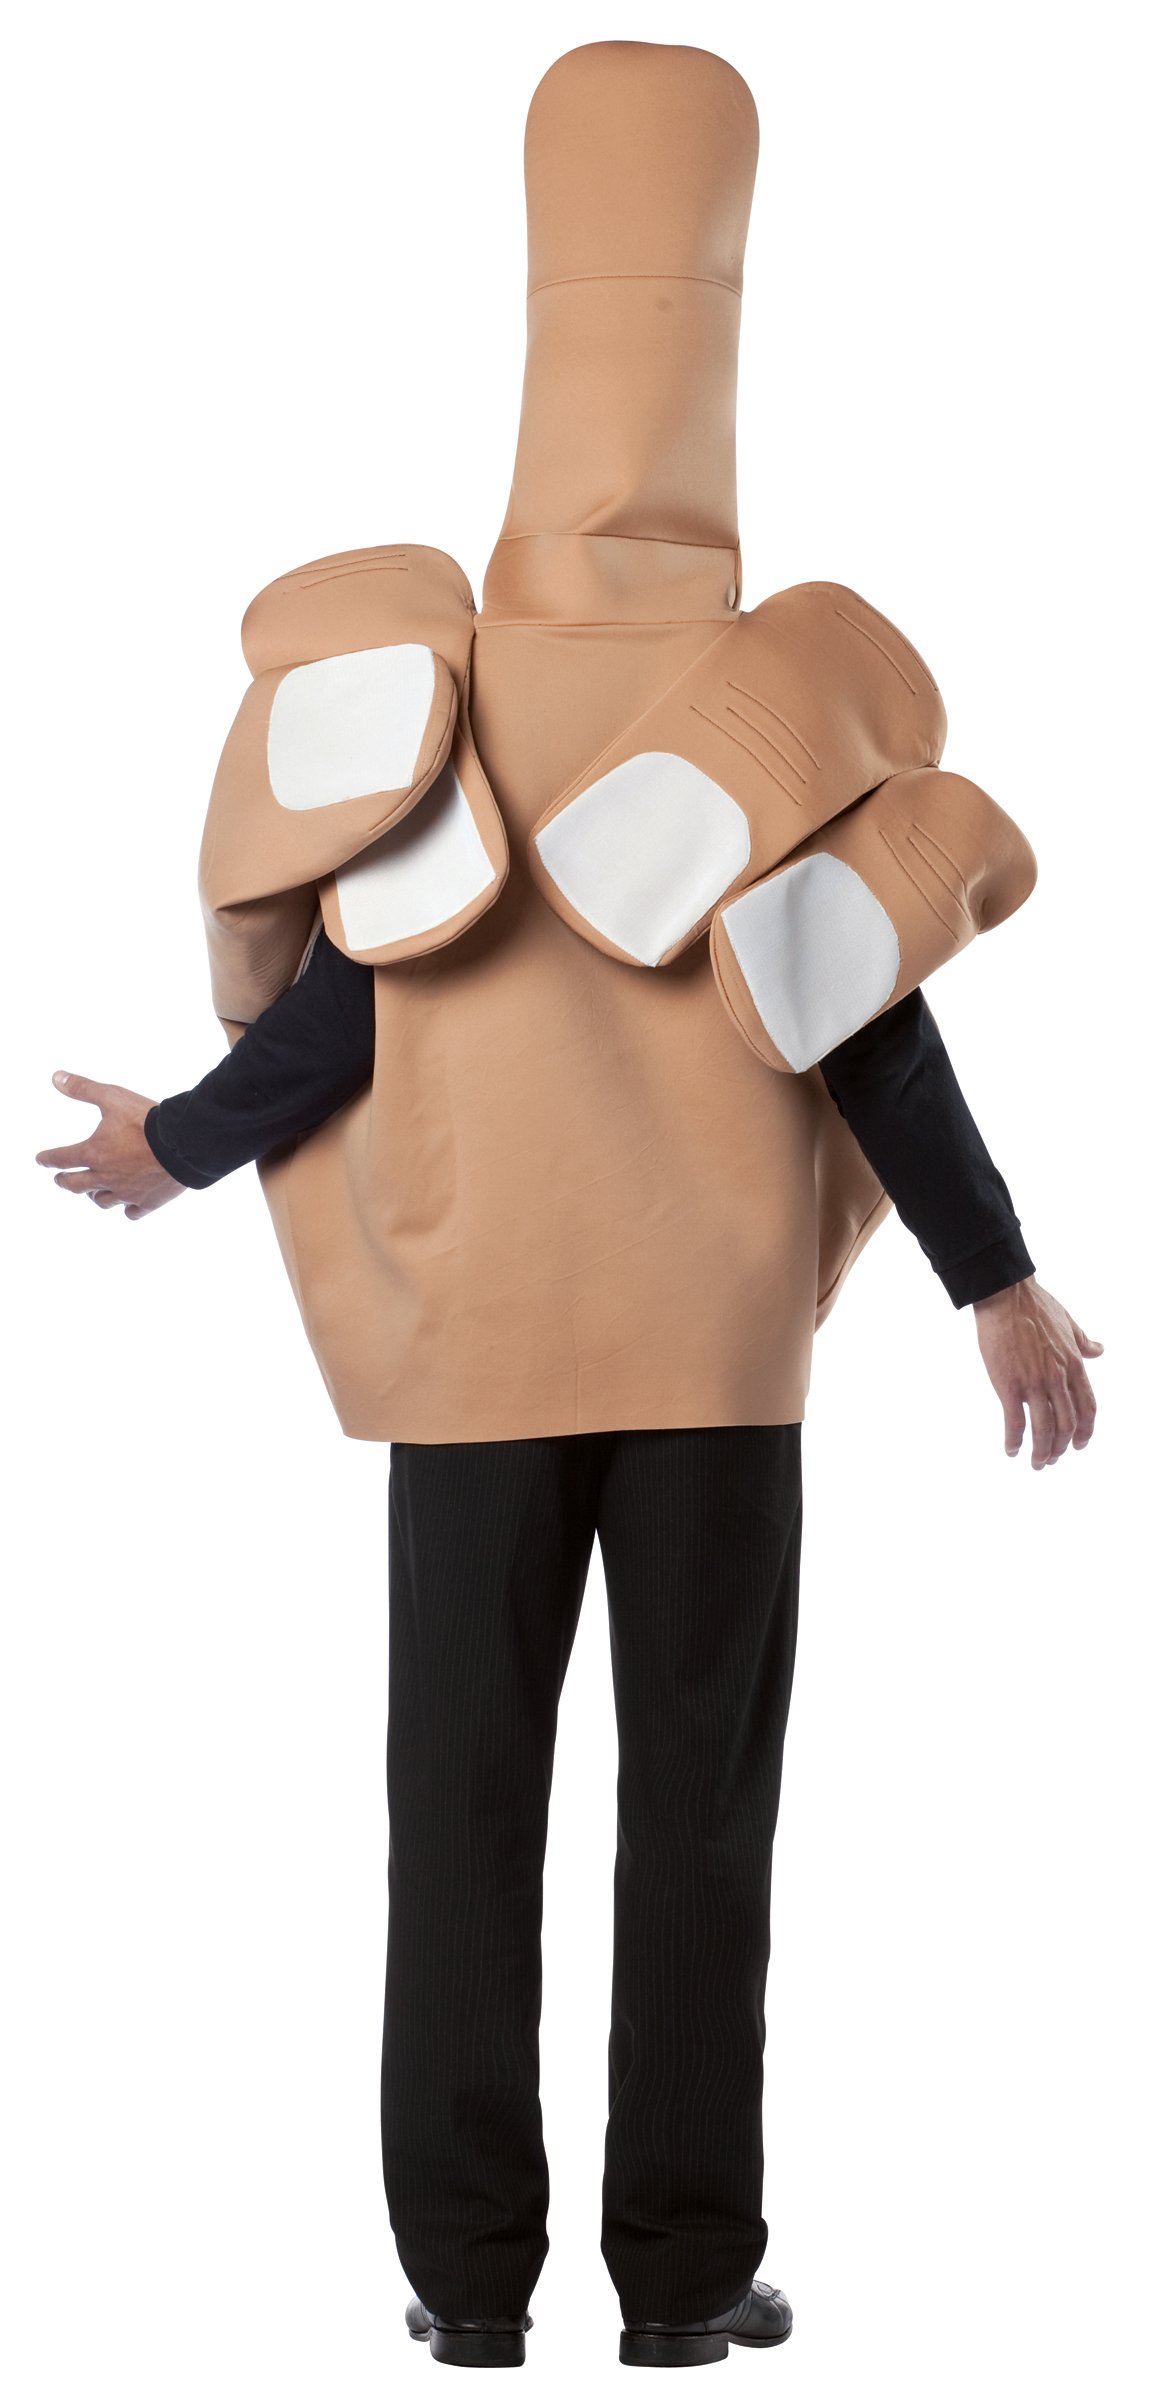 The Finger Adult Costume - Click Image to Close